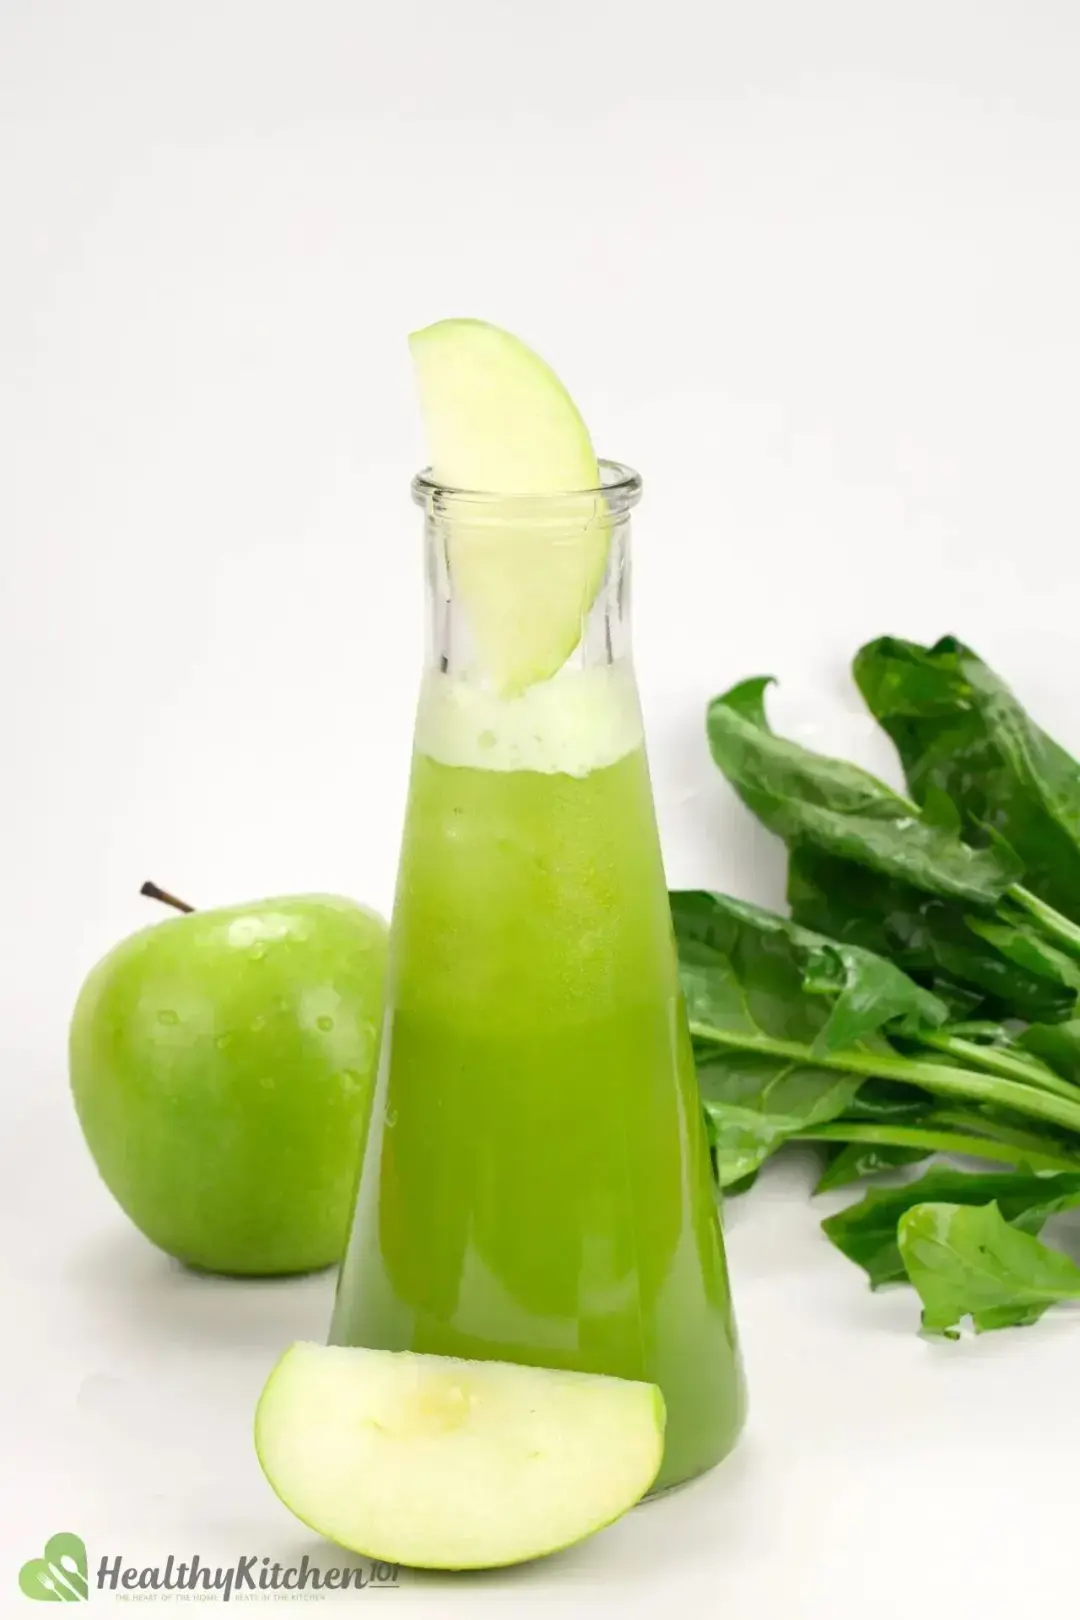 A pitcher of green apple juice with two slices of green apple, a whole green apple, and spinach